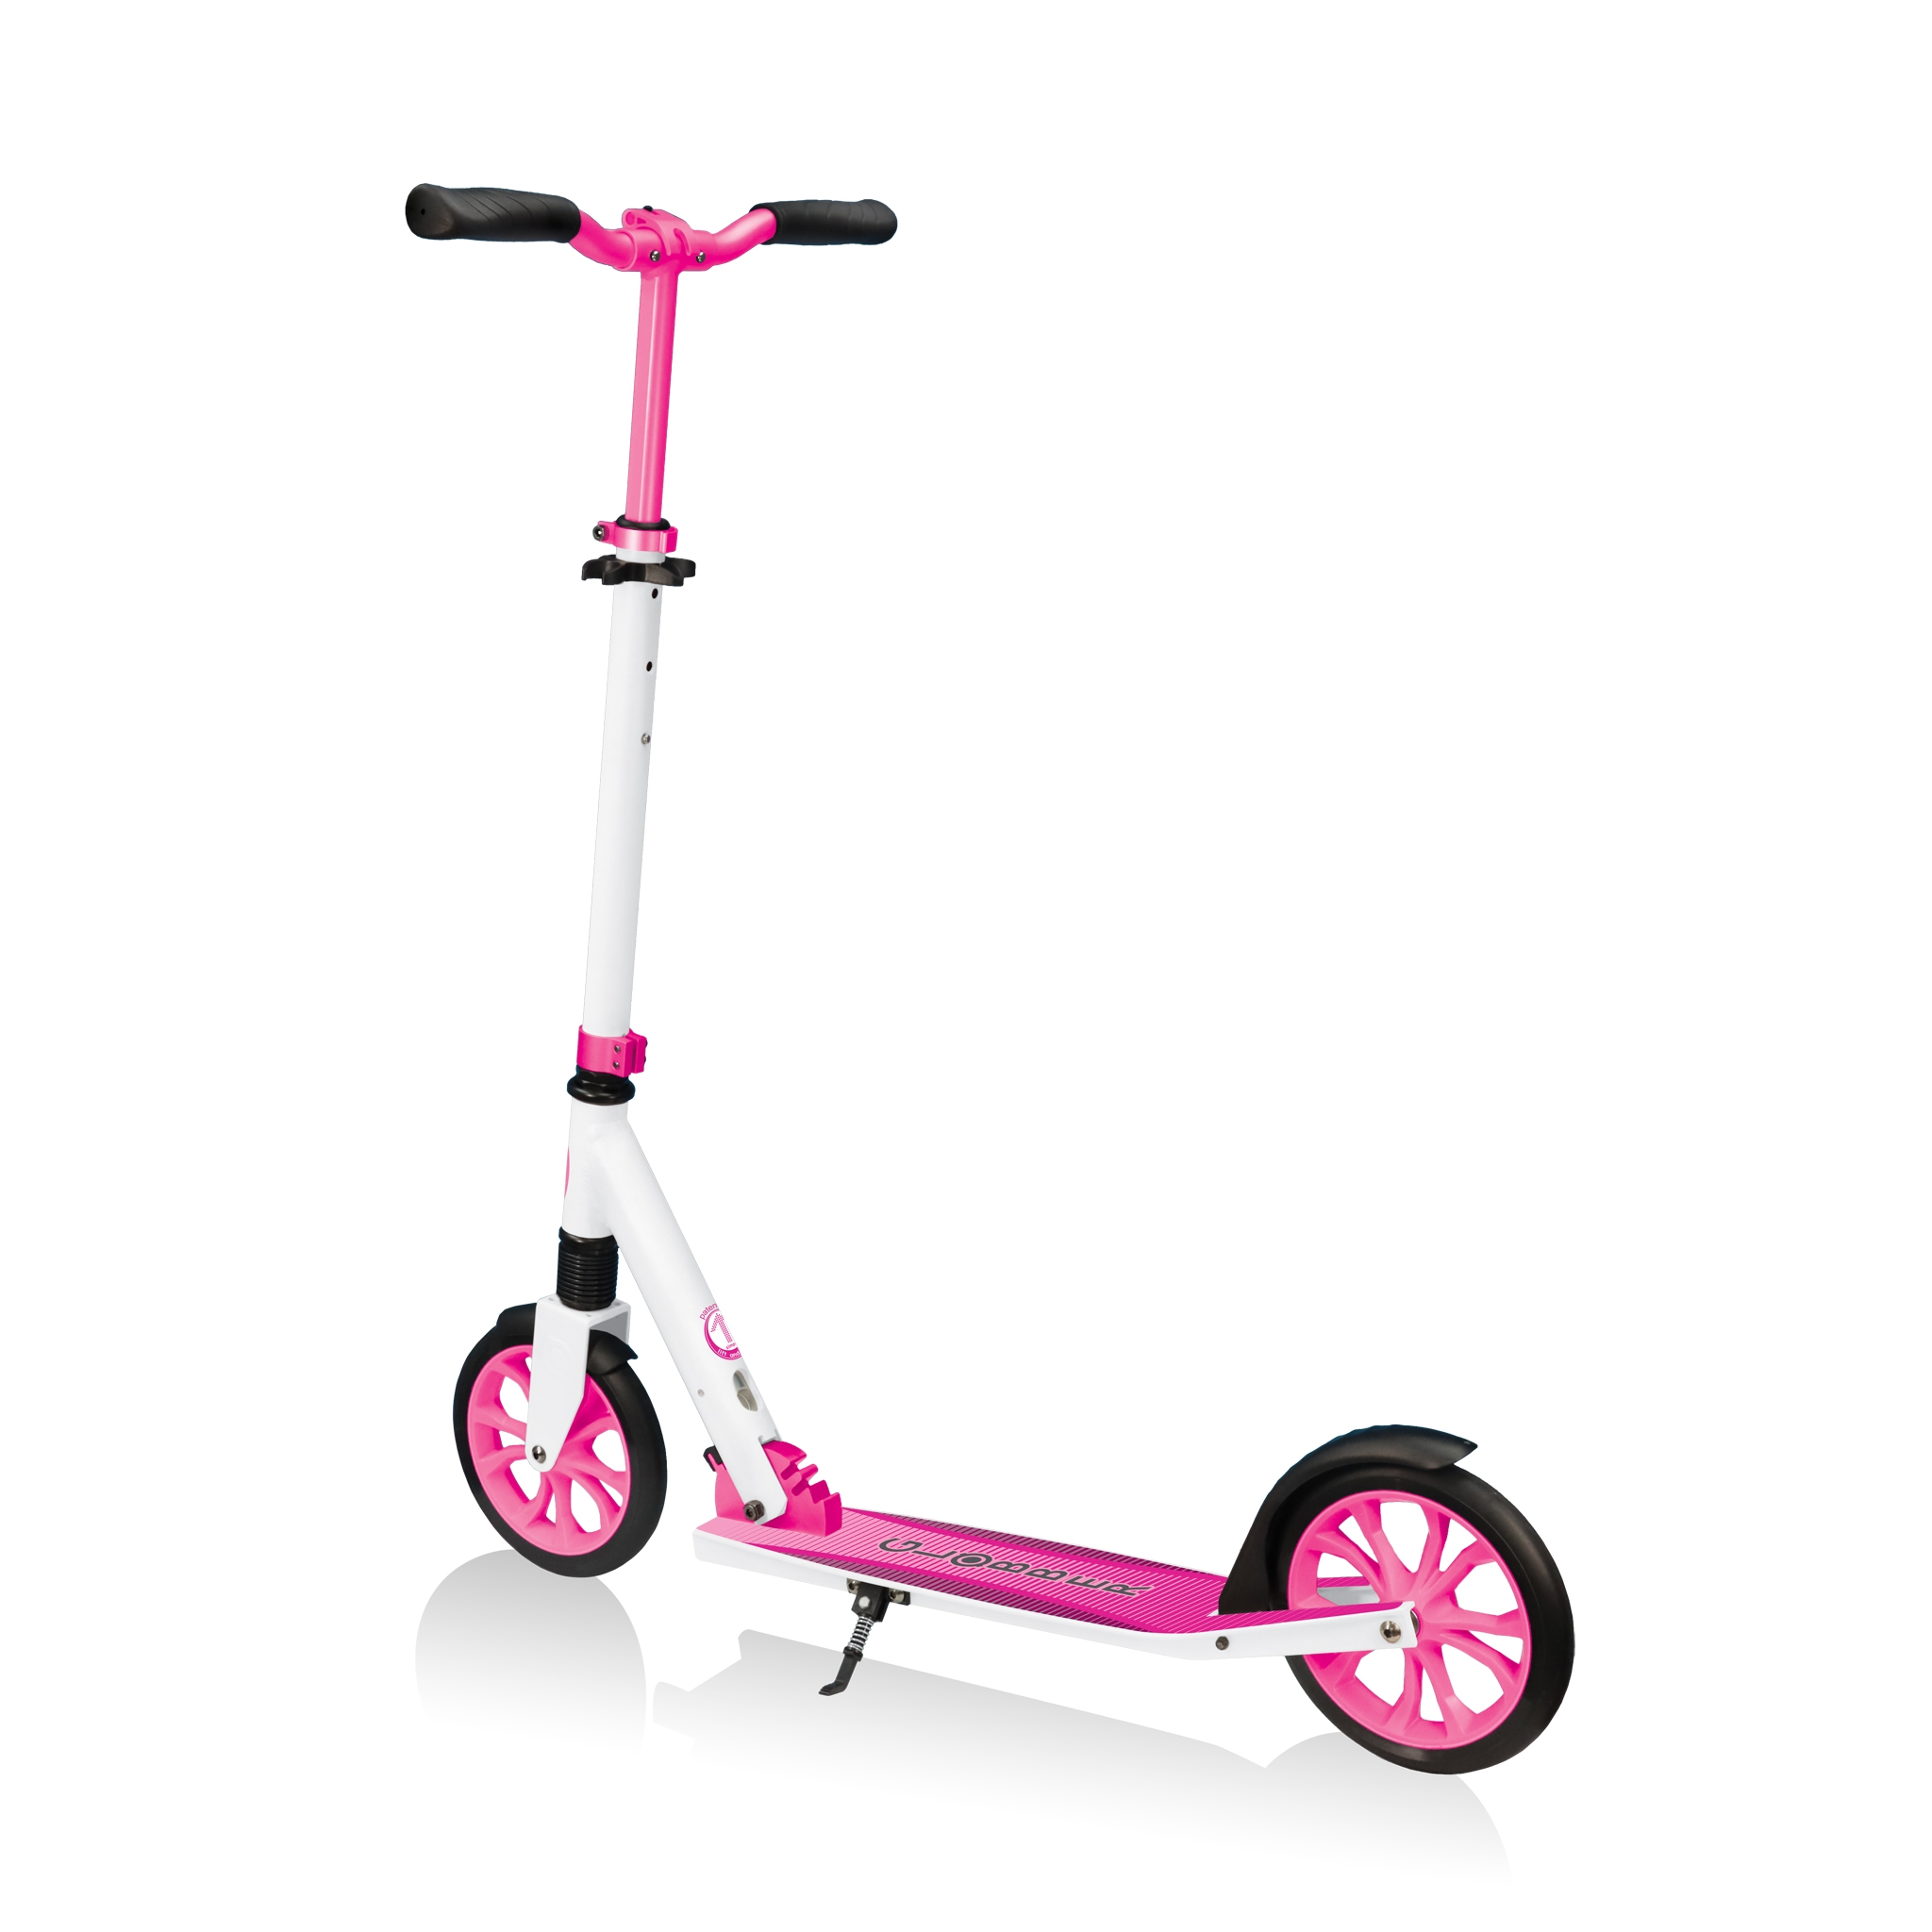 Globber-NL-205-big-wheel-scooter-for-kids-with-front-suspension 4